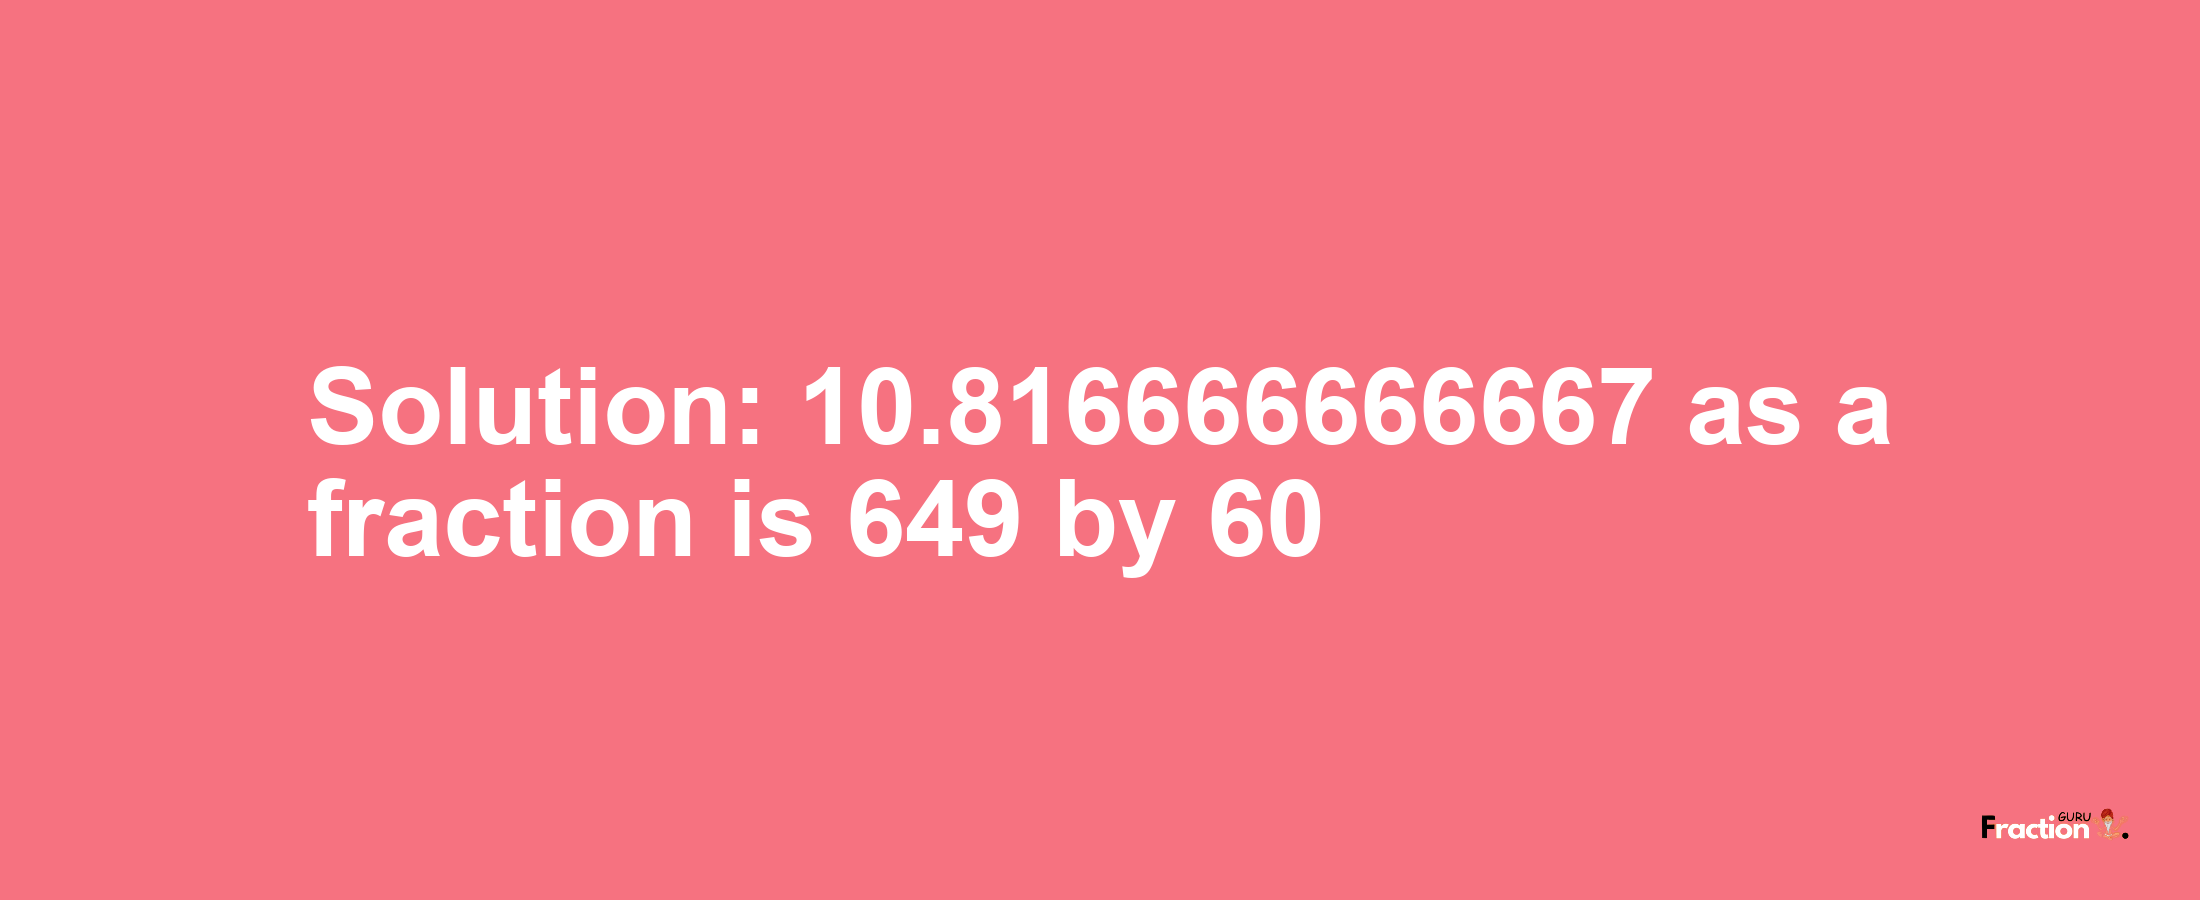 Solution:10.816666666667 as a fraction is 649/60